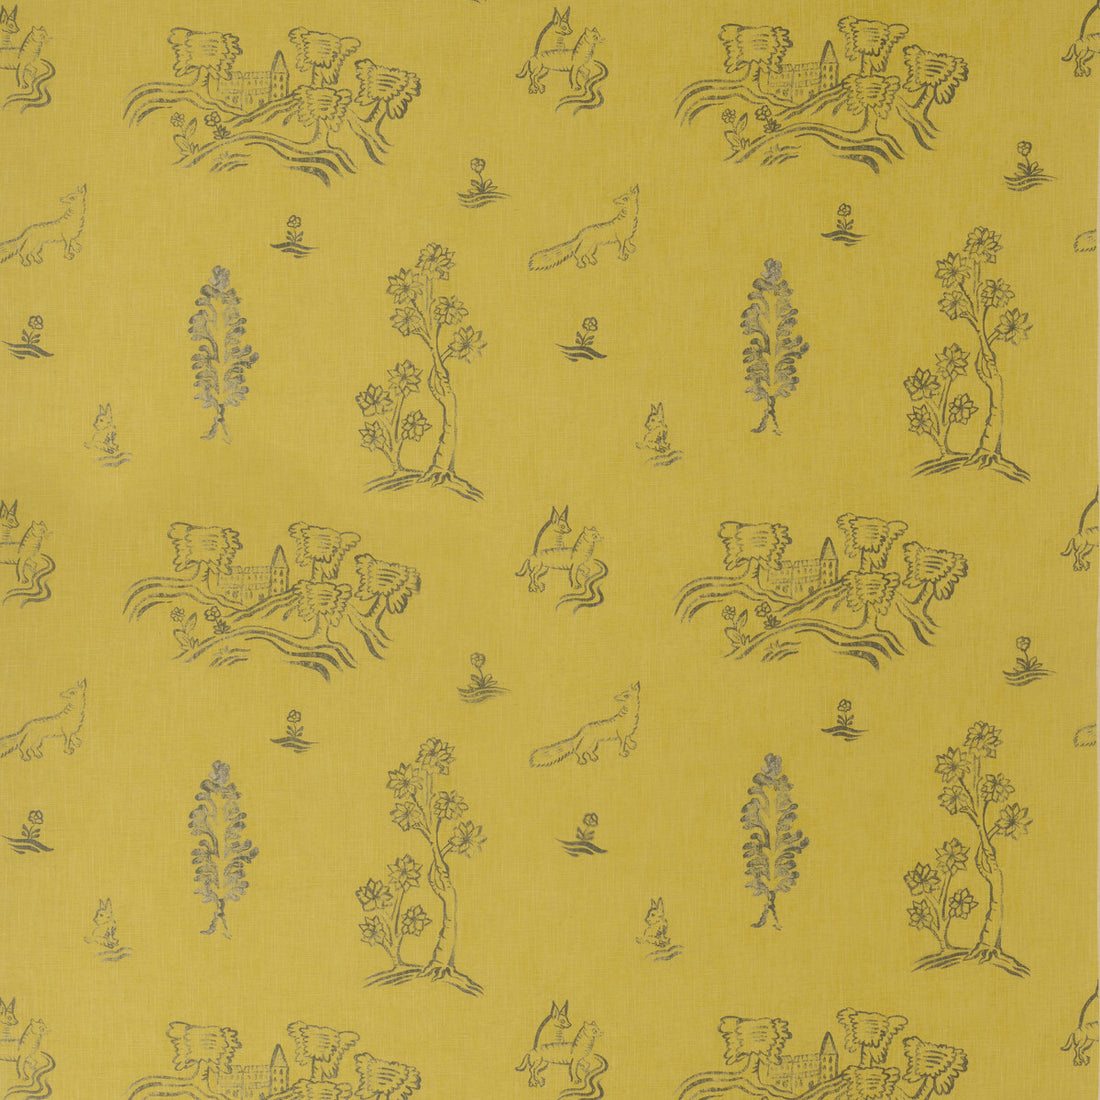 Friendly Folk fabric in provencal yellow color - pattern AM100318.4.0 - by Kravet Couture in the Andrew Martin Kit Kemp collection